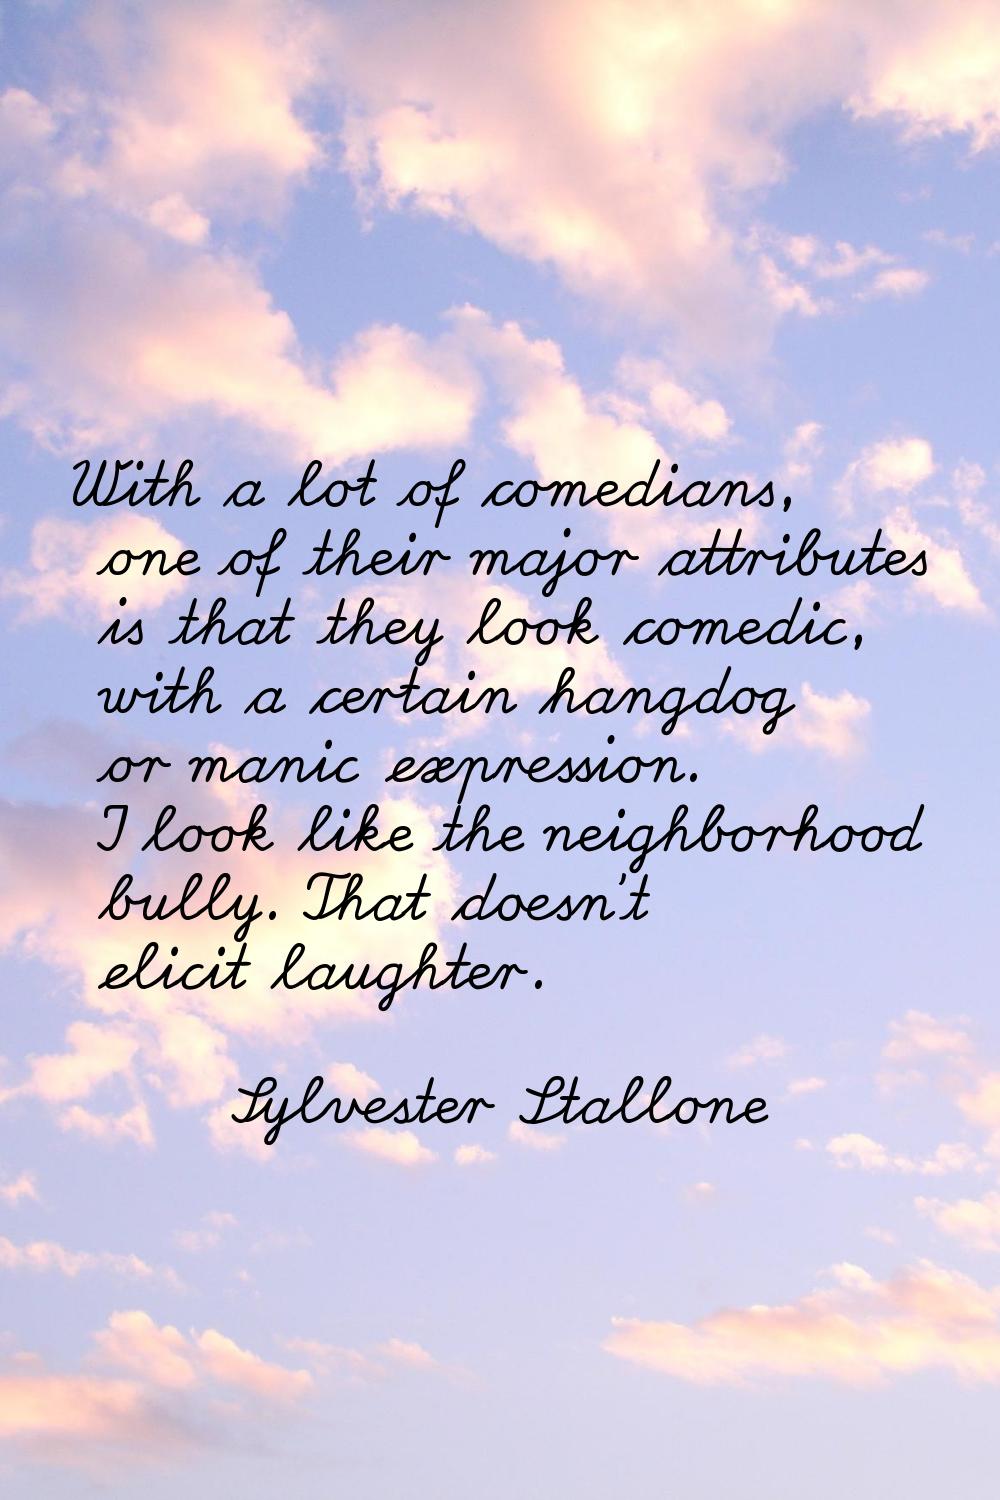 With a lot of comedians, one of their major attributes is that they look comedic, with a certain ha